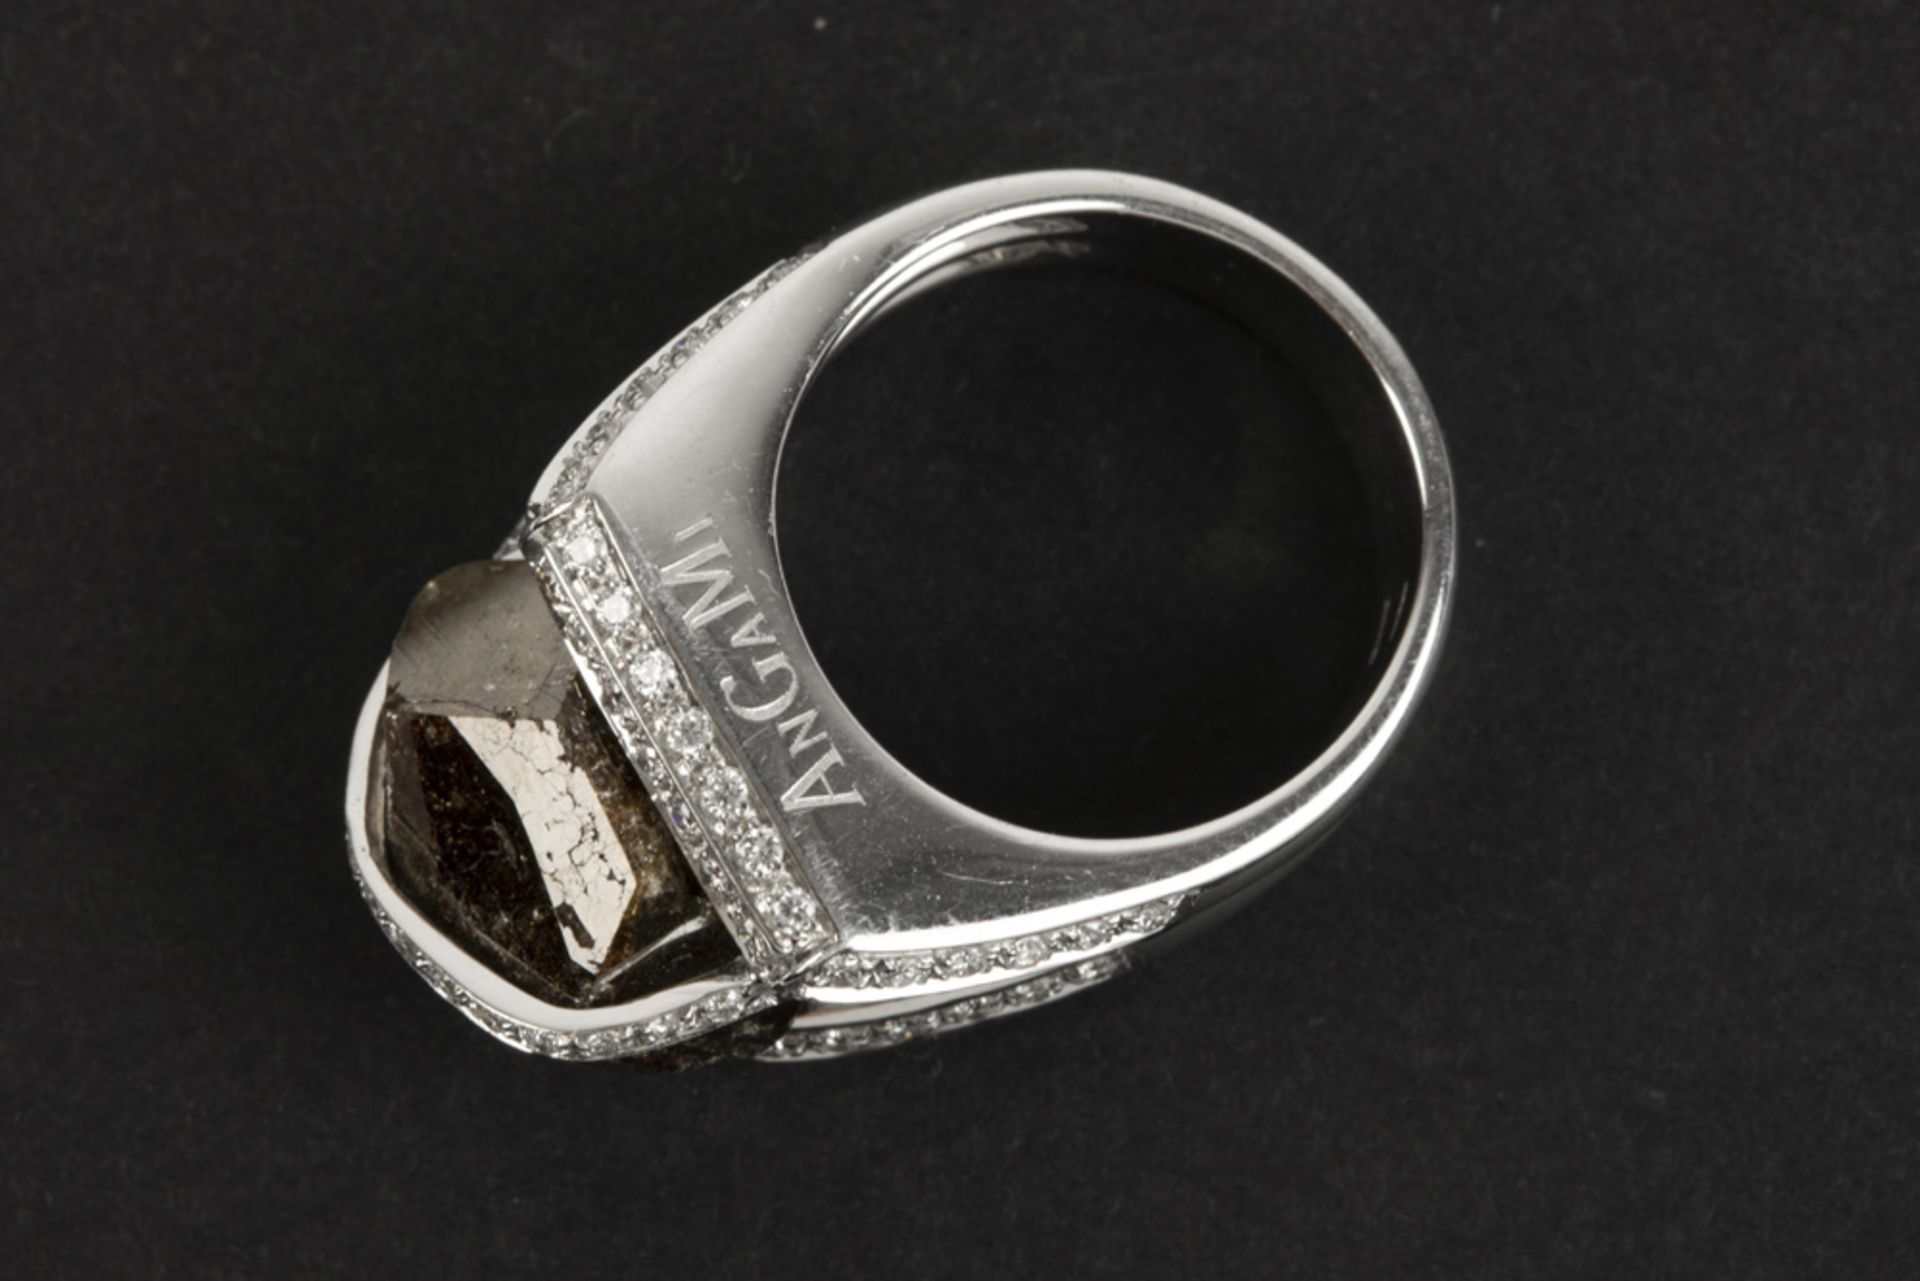 Italian AnGami signed ring with a special design in white gold (18 carat) with a ca 22 carat diamond - Image 2 of 2